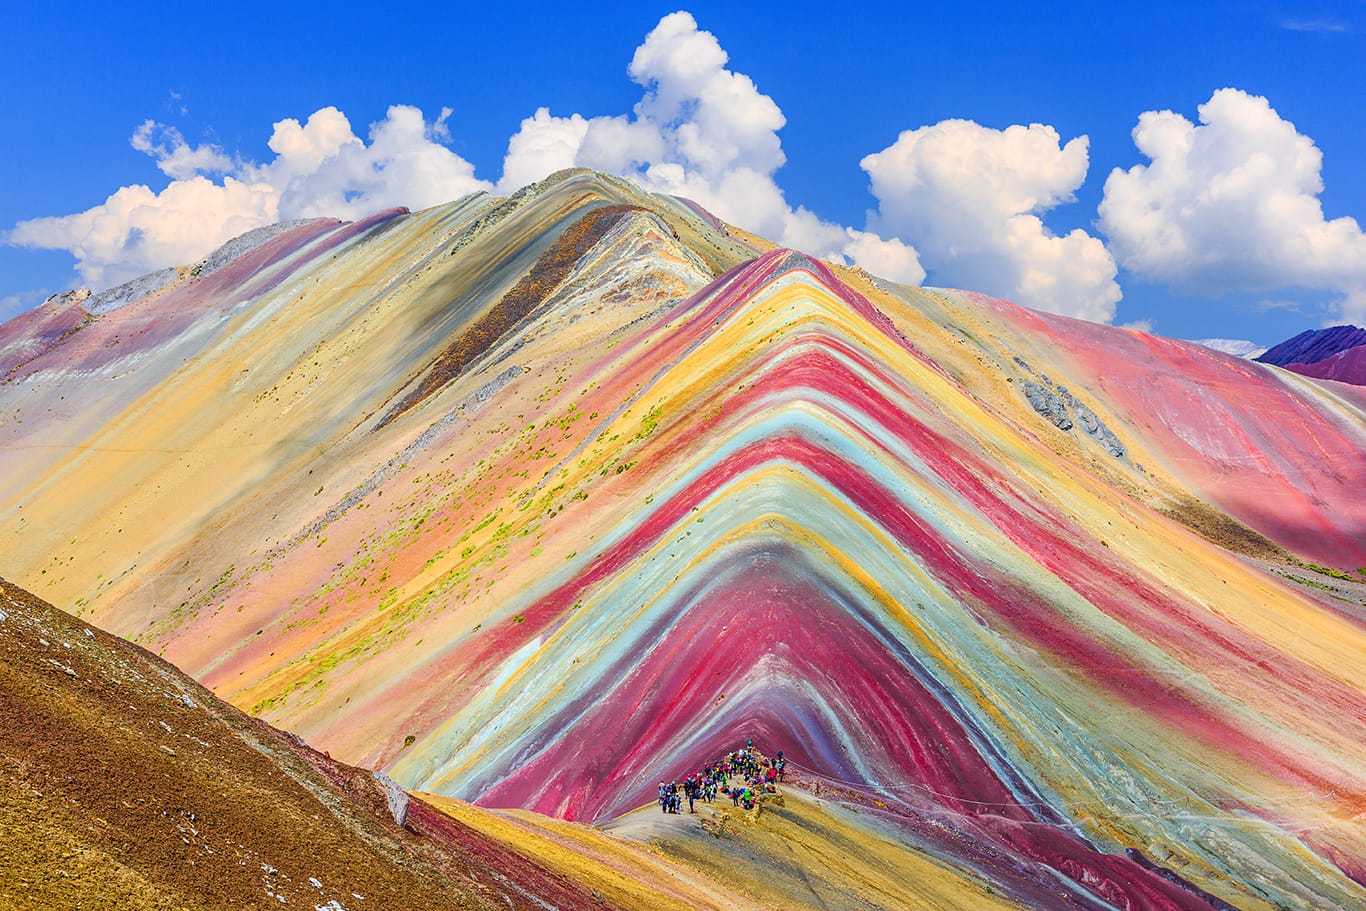 Rainbow mountains with people walking through them 